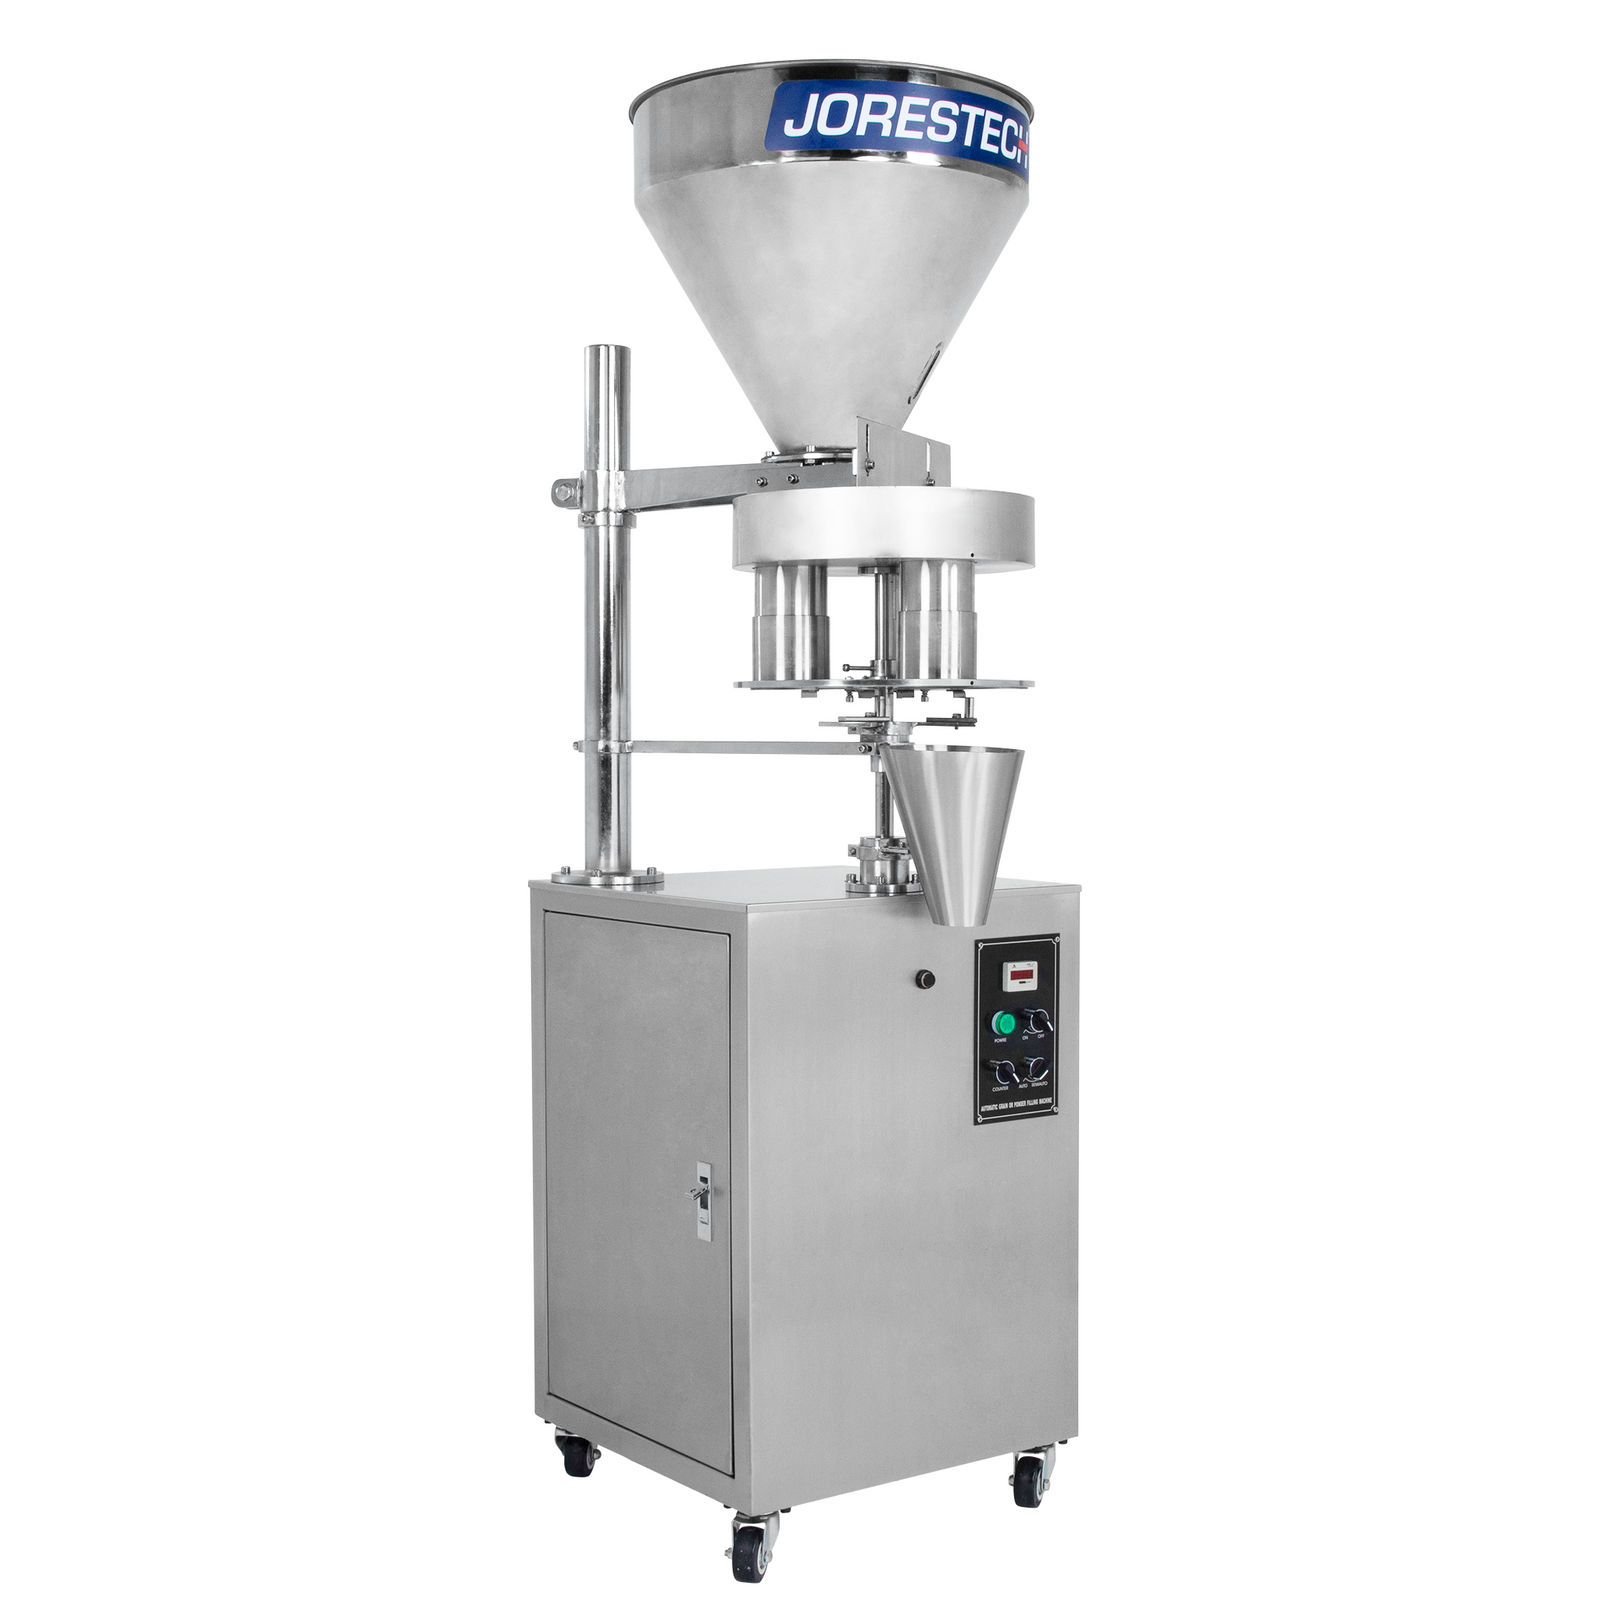 The stainless steel JORES TECHNOLOGIES® semi automatic volumetric filler for free-flowing granular products in a diagonal view